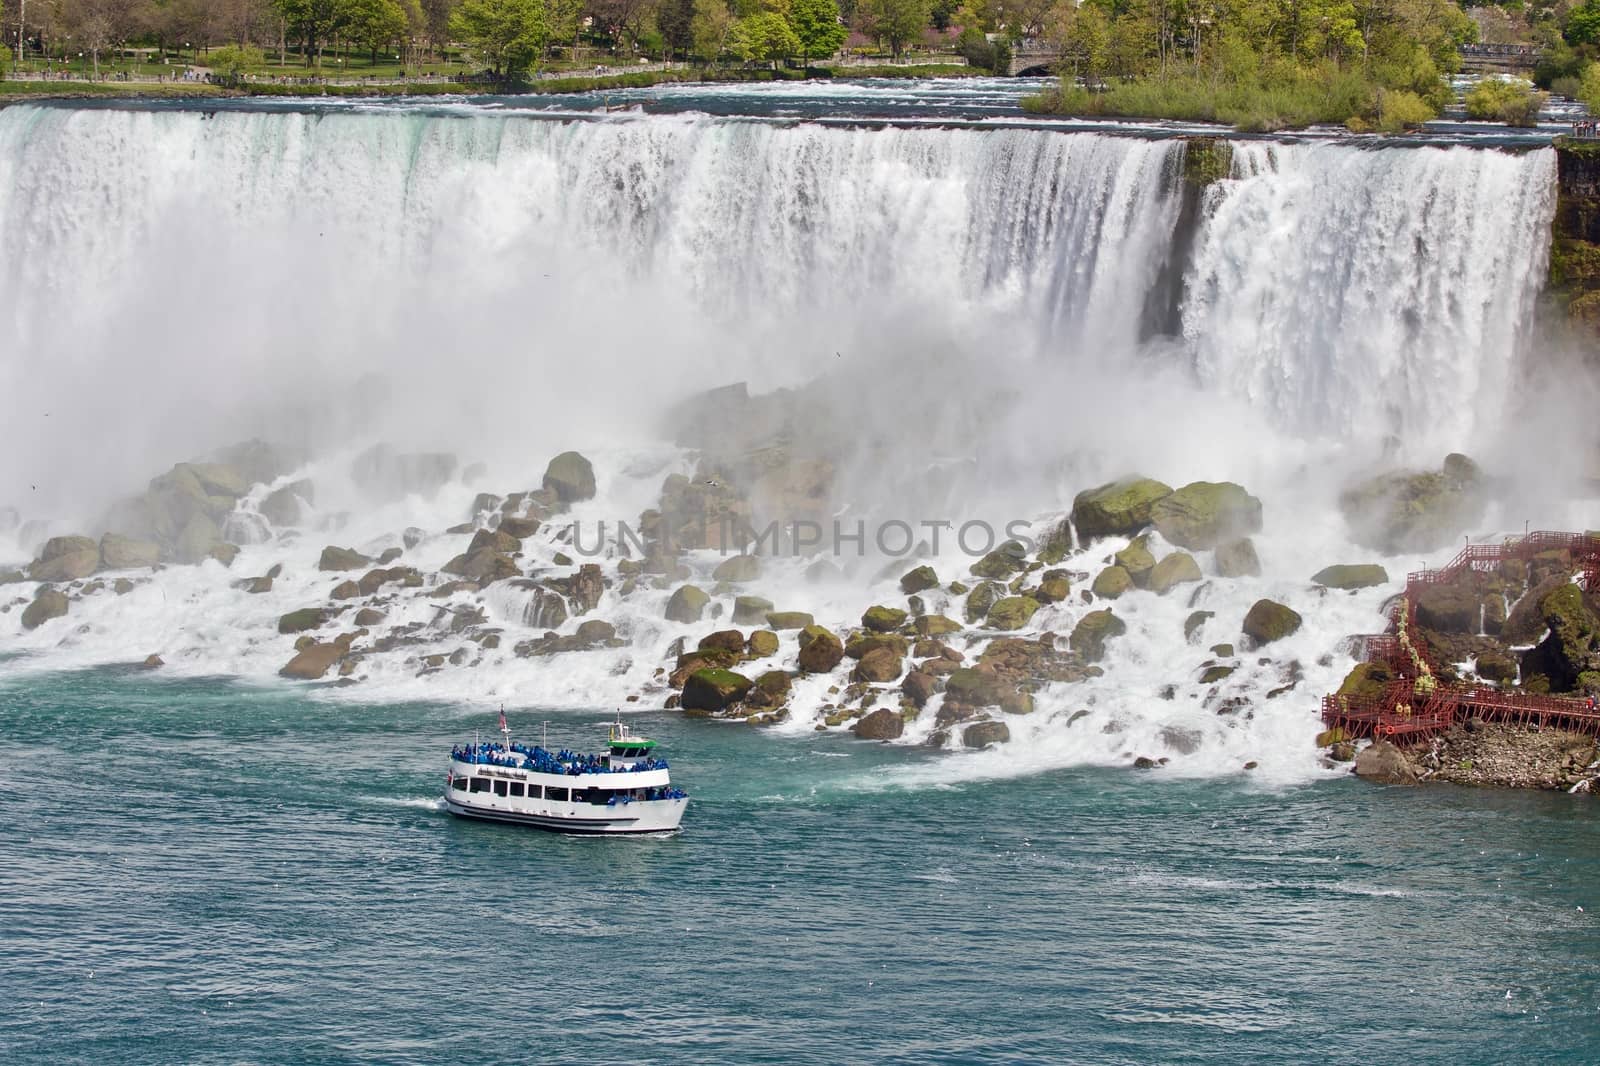 Beautiful isolated image of a ship and amazing Niagara waterfall by teo